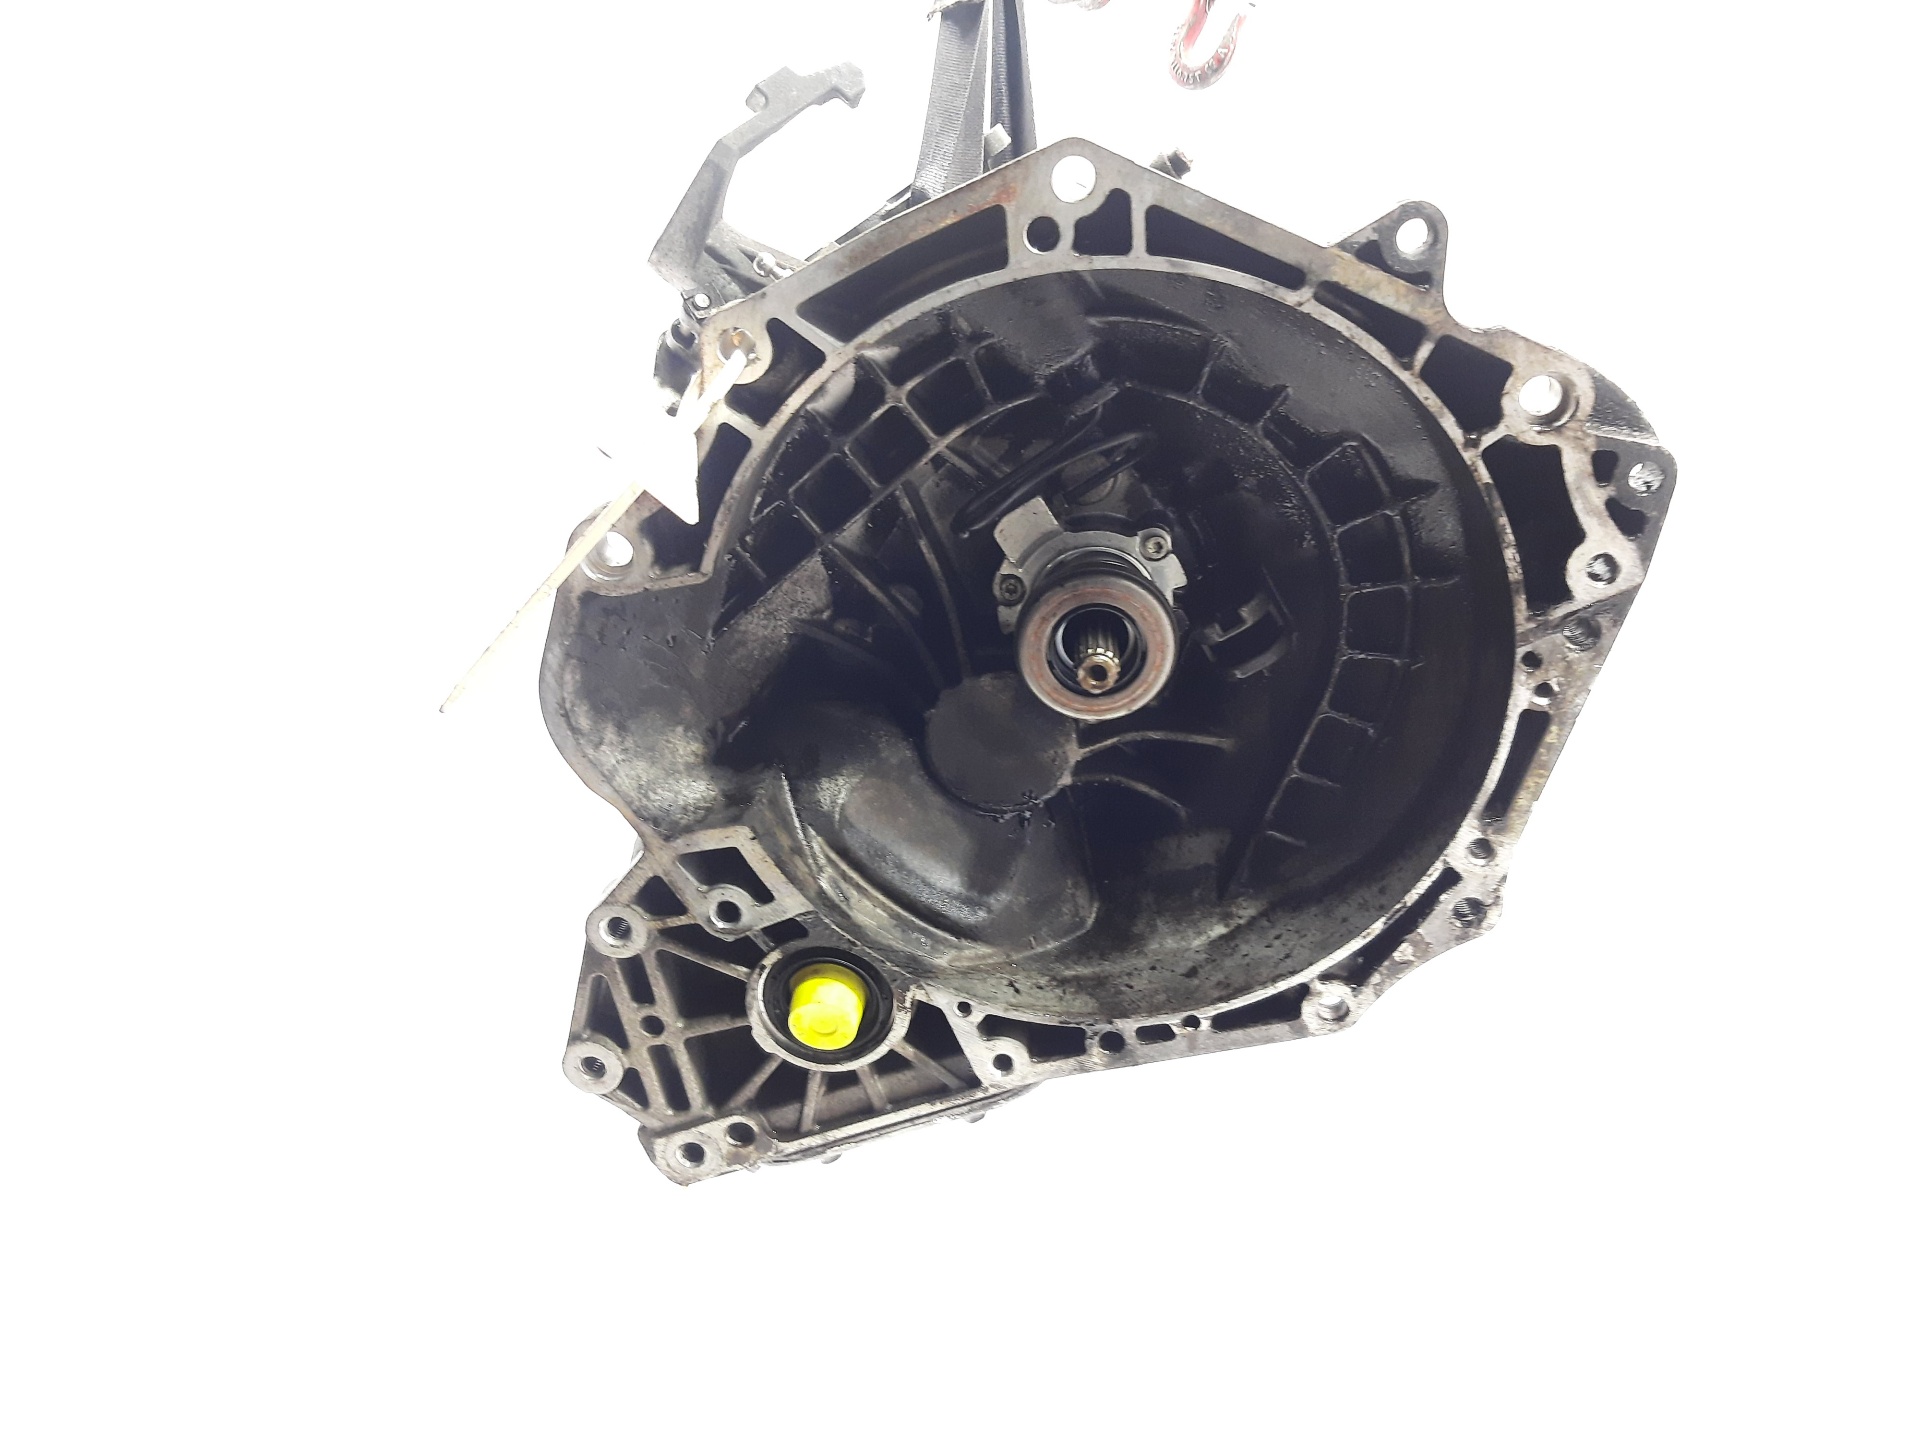 OPEL Vectra 7 generation (2005-2015) Gearbox F17C374, 5VELOCIDADES 24787081